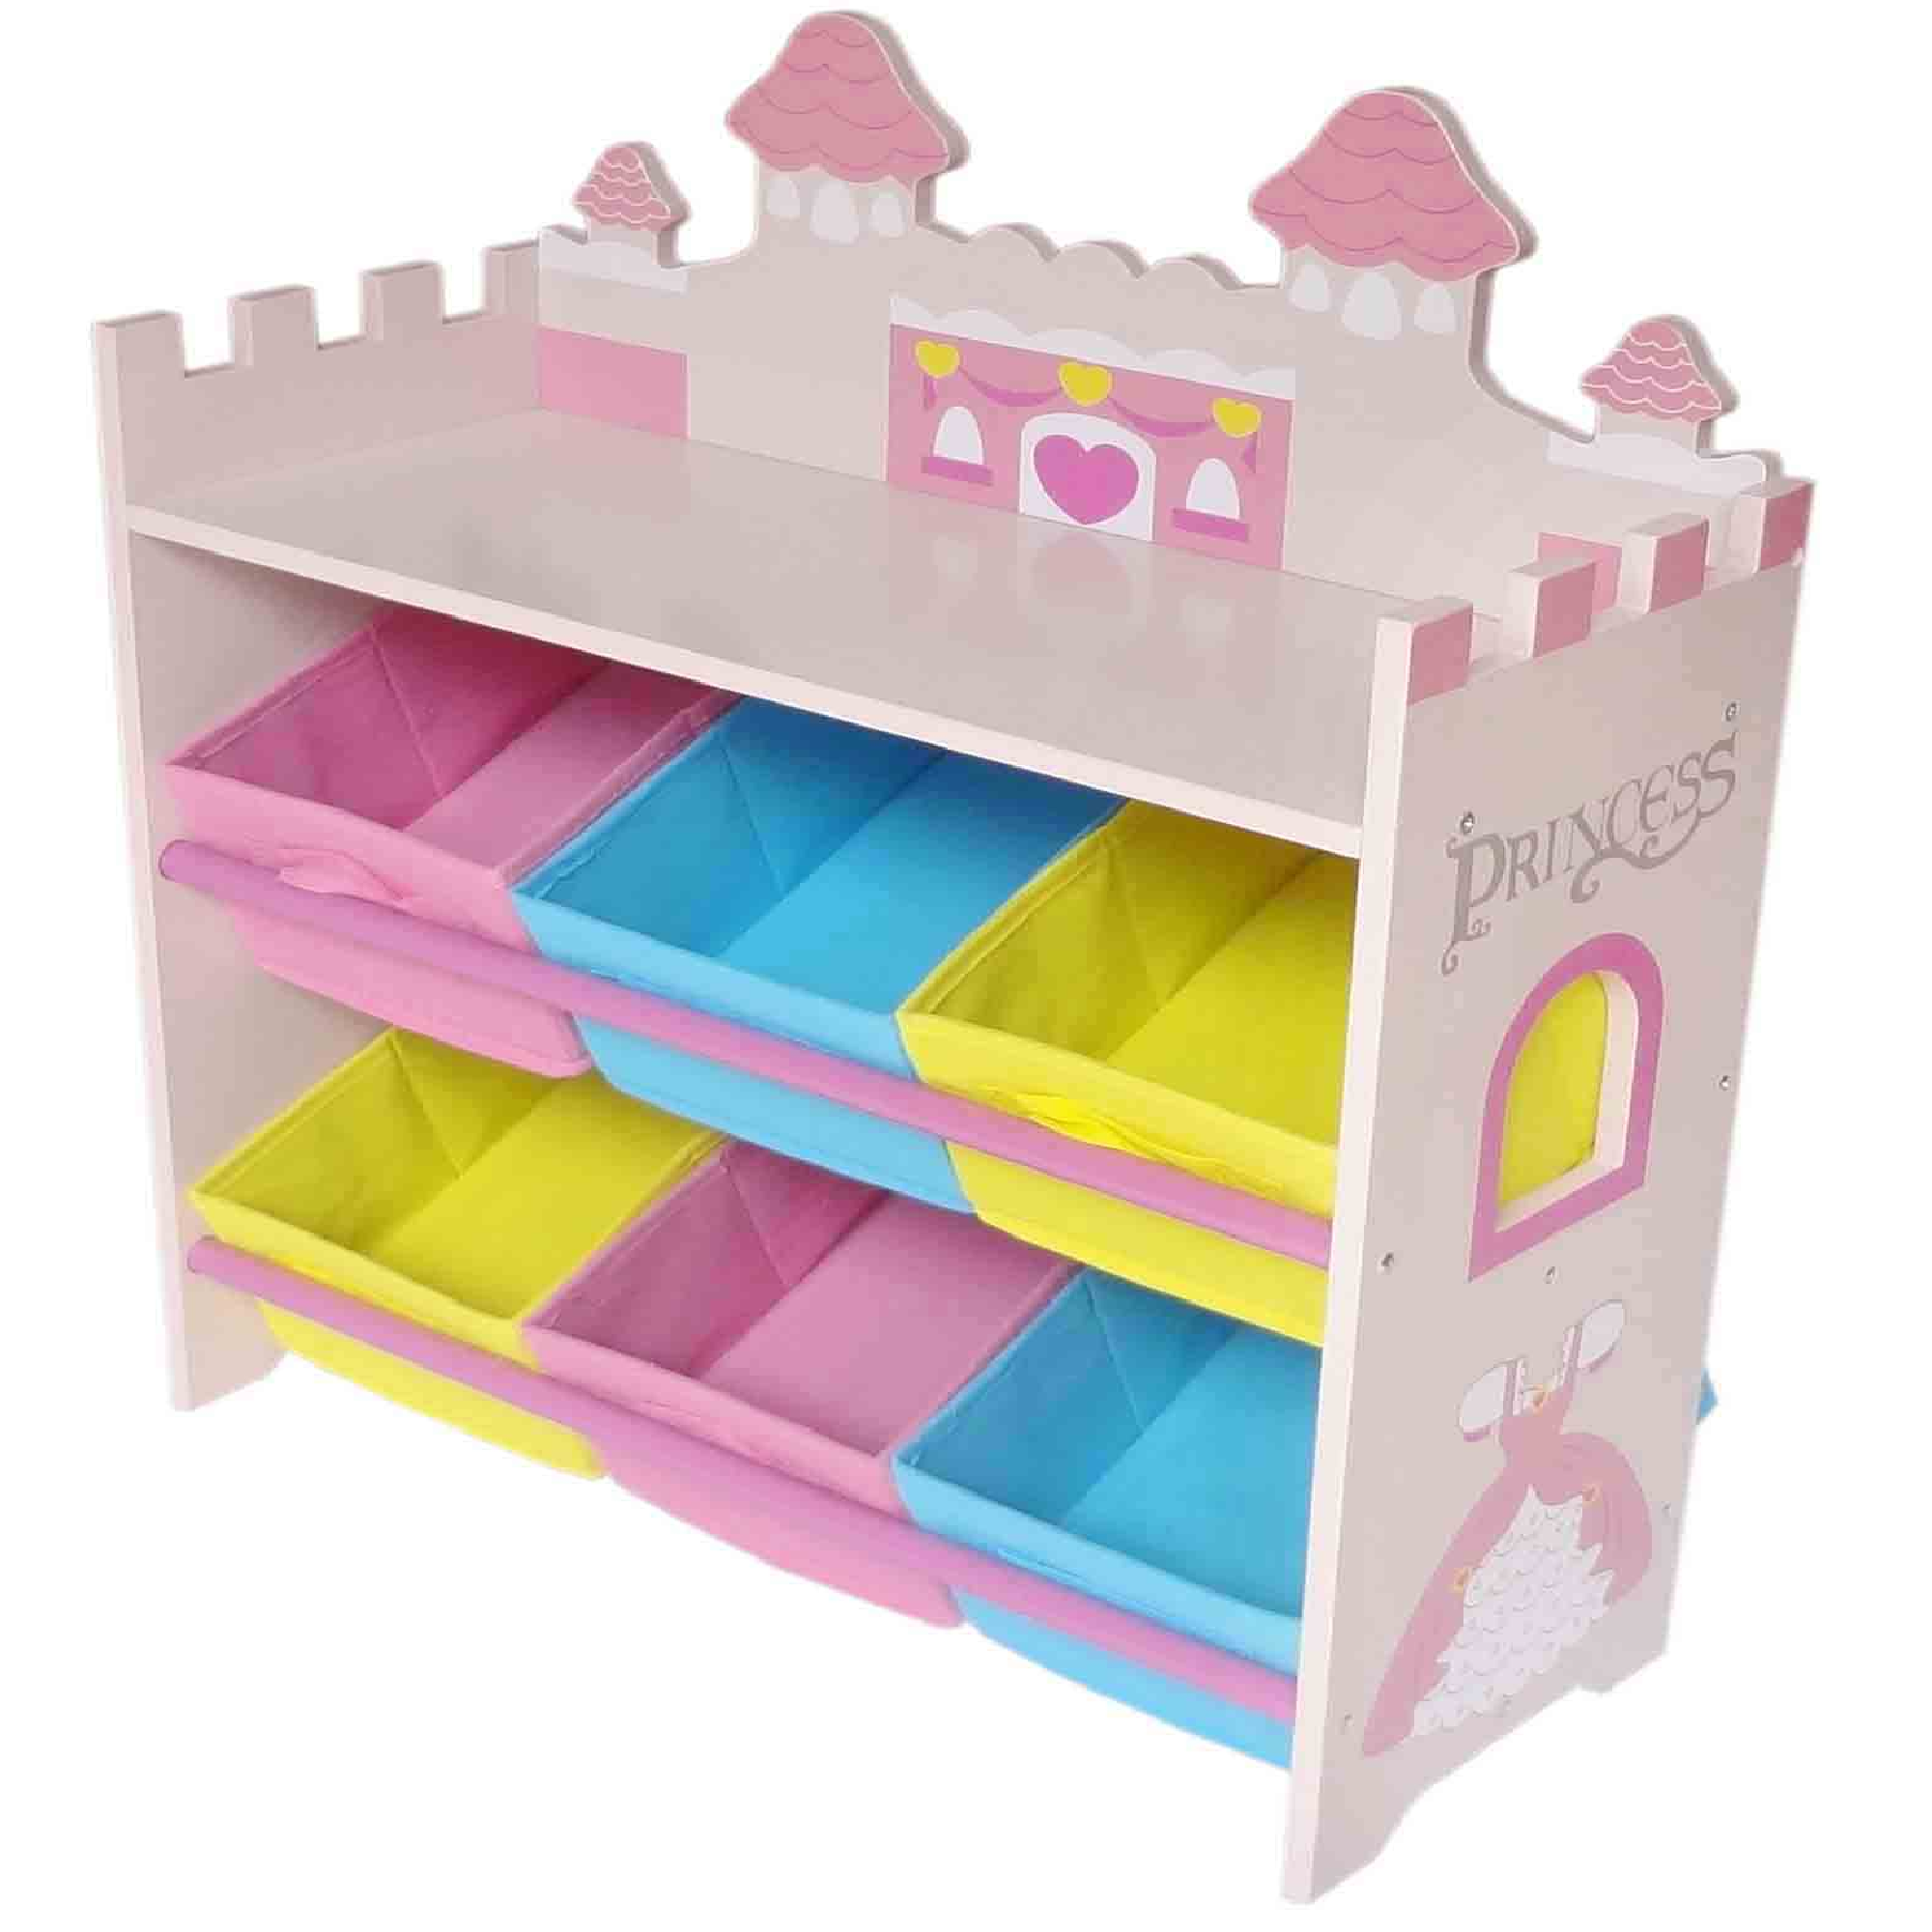 Kiddi Style Childrens Sized Unit with 6 Storage Boxes 